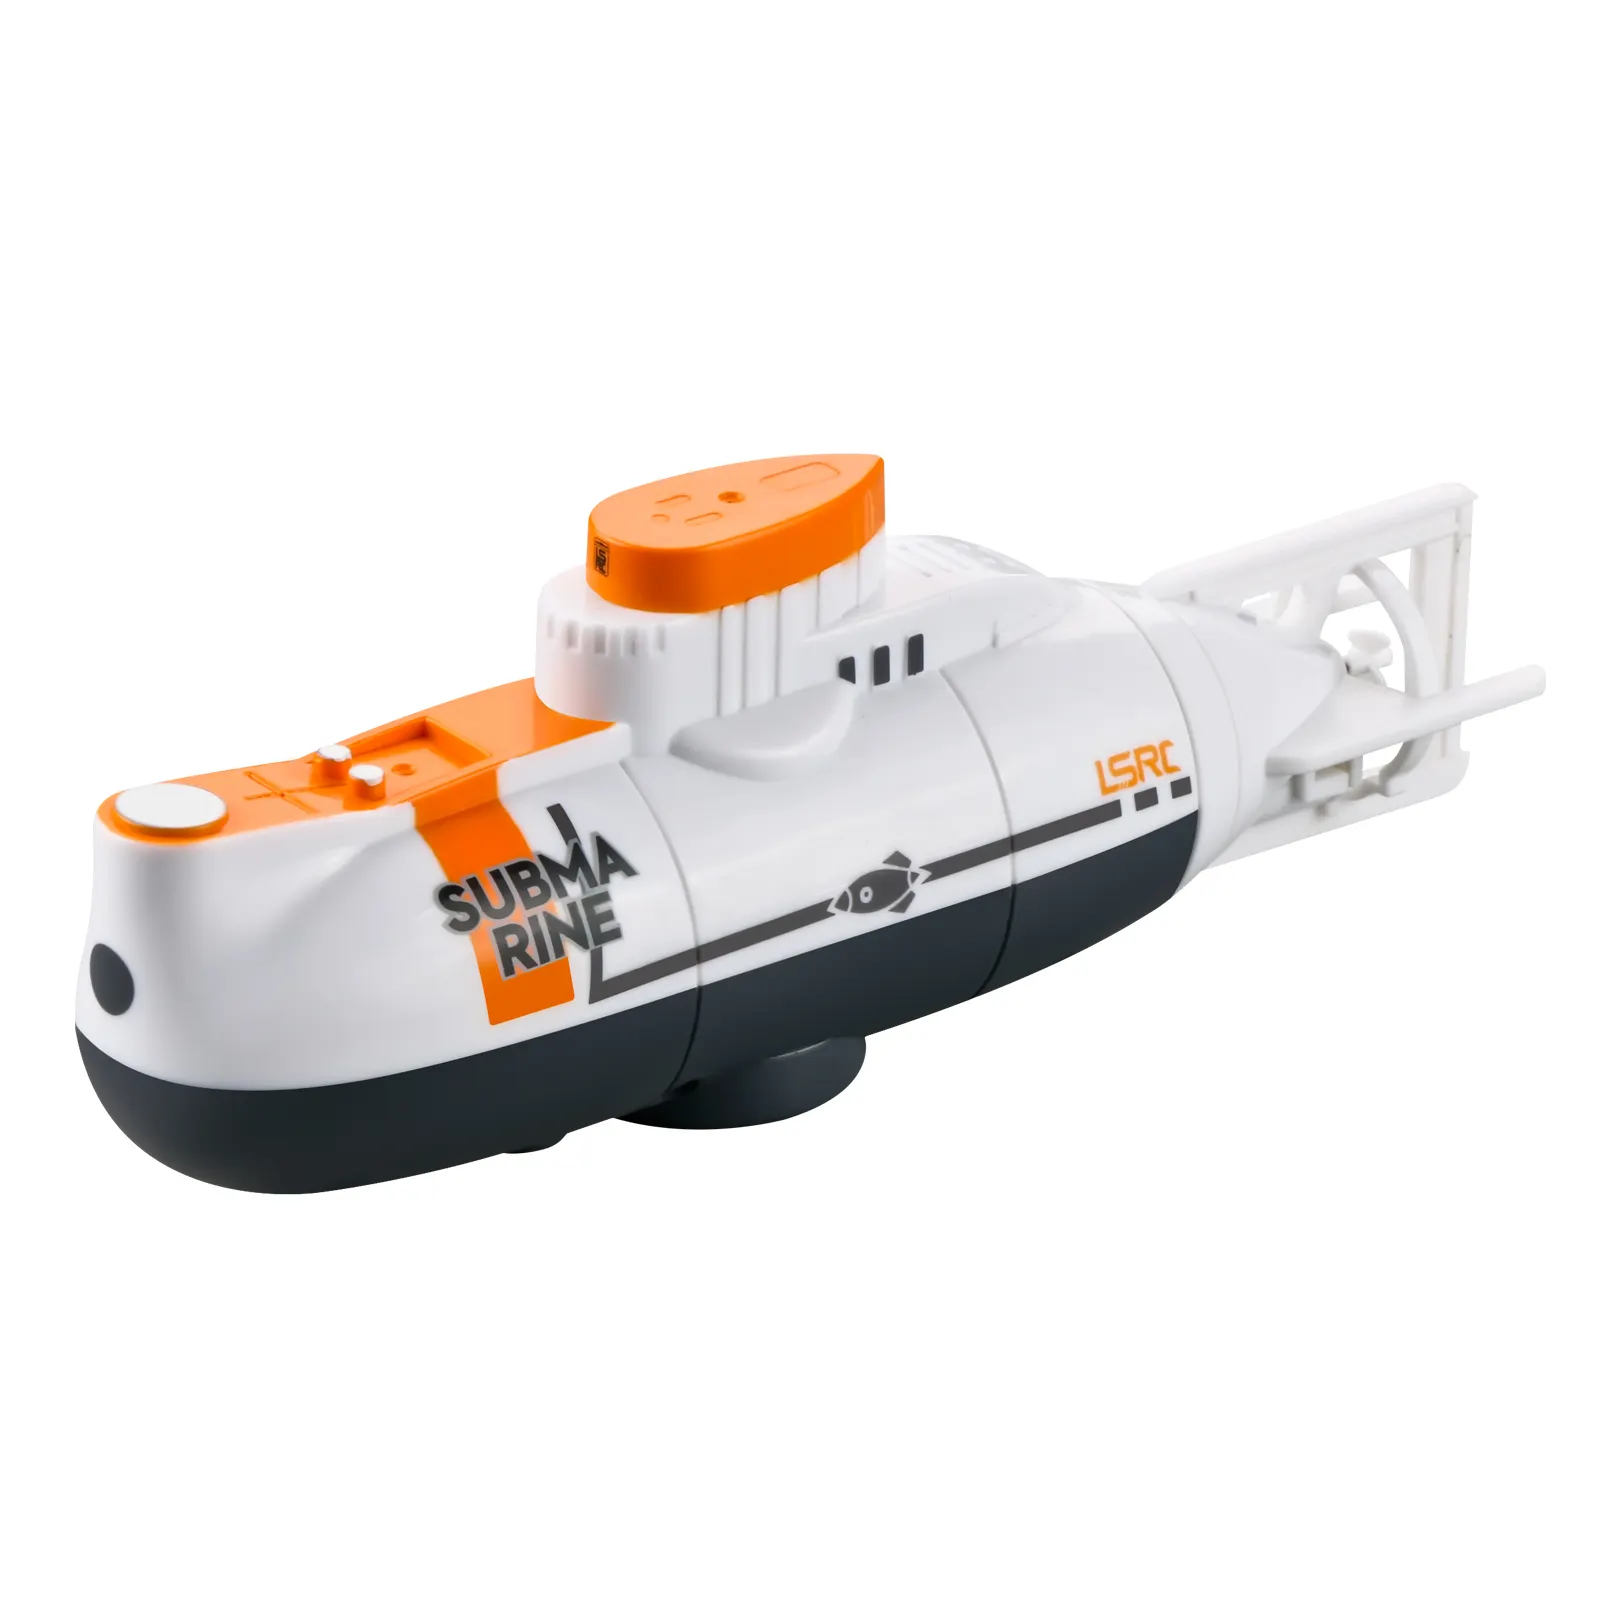 Fashion RC Submarine remote control boat Waterproof 70M underwater toy long playing time simulation model gift